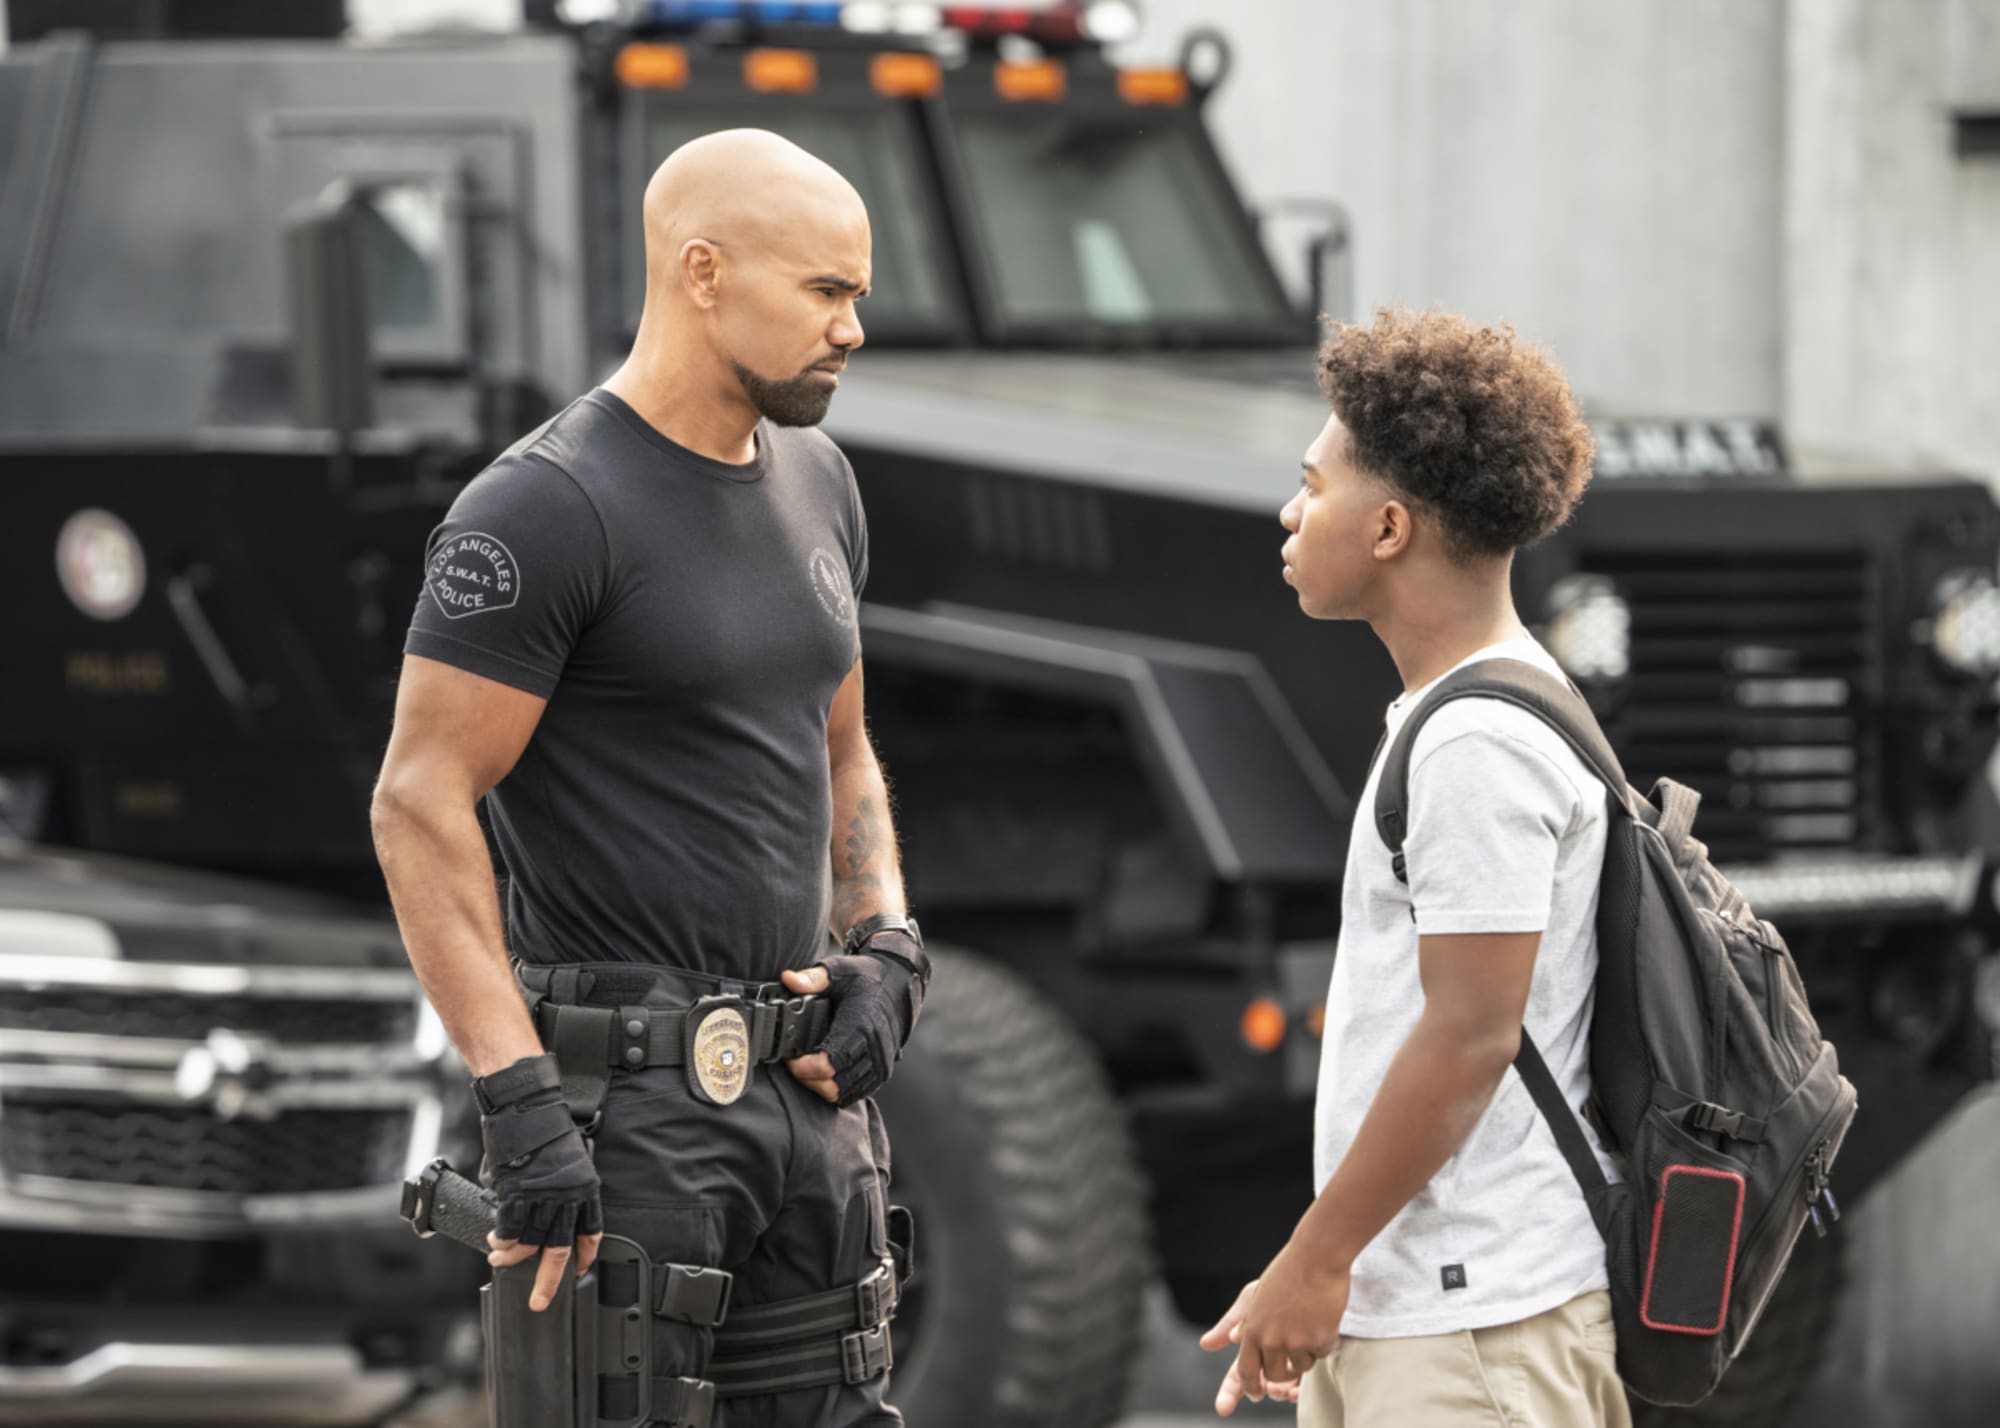 SWAT Season 5 What's next for Hondo on the series?